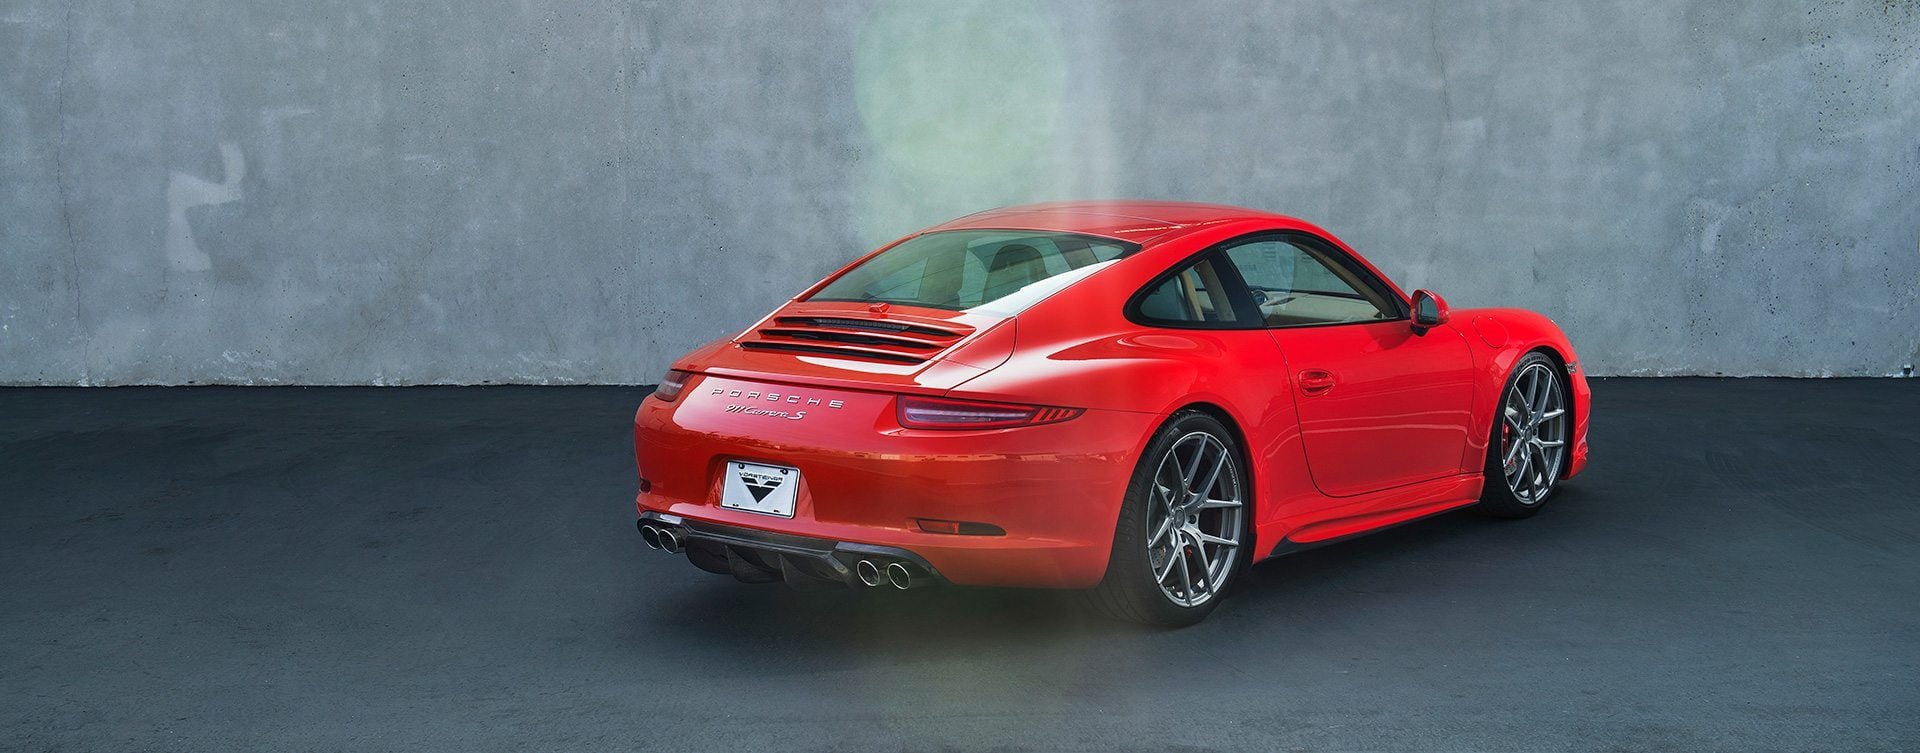 Exterior Body Parts - Supreme Power | Vorsteiner 991.1 Rear Diffuser GROUP BUY! Up to $500 savings! - 2012 to 2016 Porsche 911 - Fullerton, CA 92831, United States